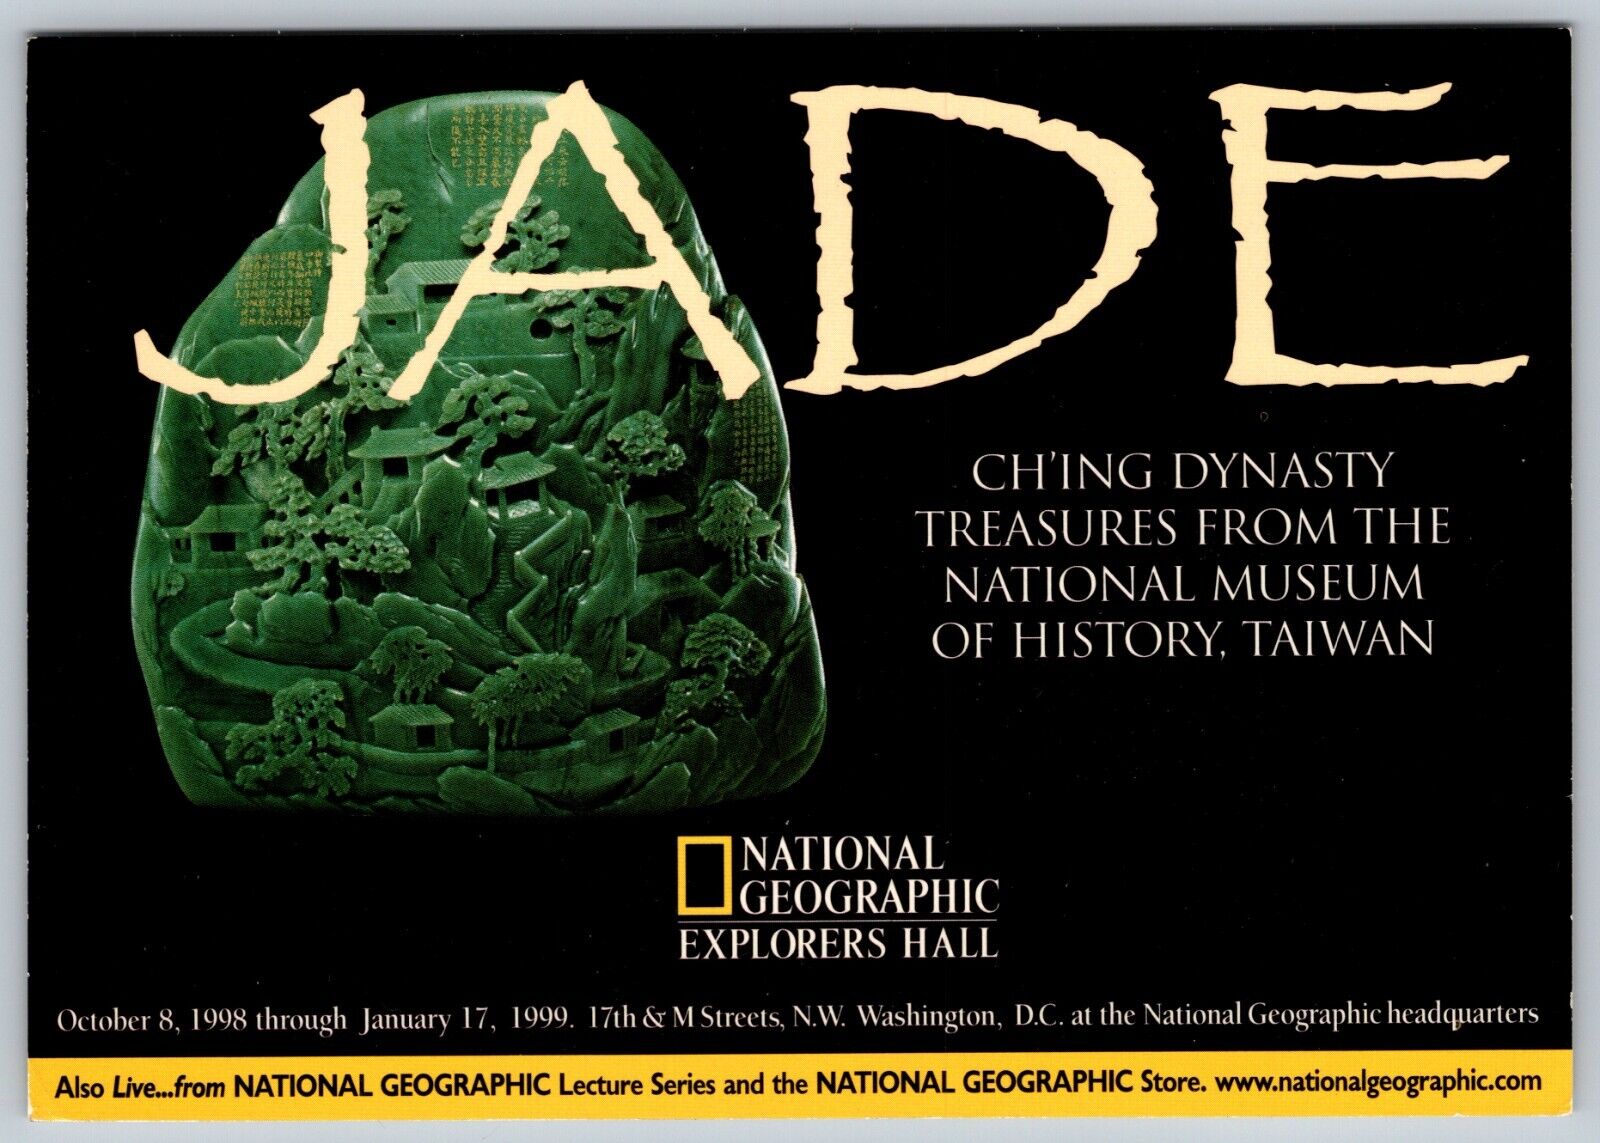 JADE CHING DYNASTY TREASURES FROM THE NATIONAL MUSEUM OF HISTORY AD POSTCARD